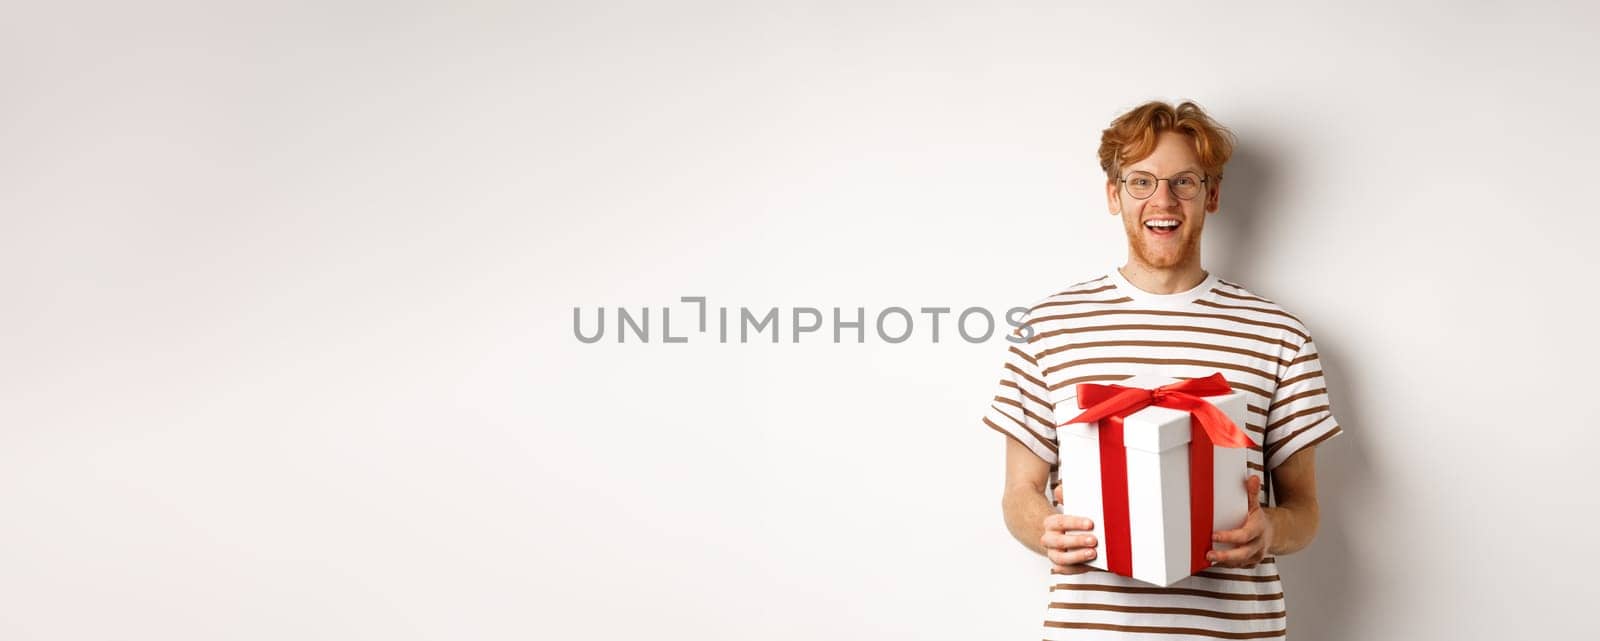 Valentines day and holidays concept. Cheerful young man holding gift box and smiling grateful, receiving presents, standing over white background.